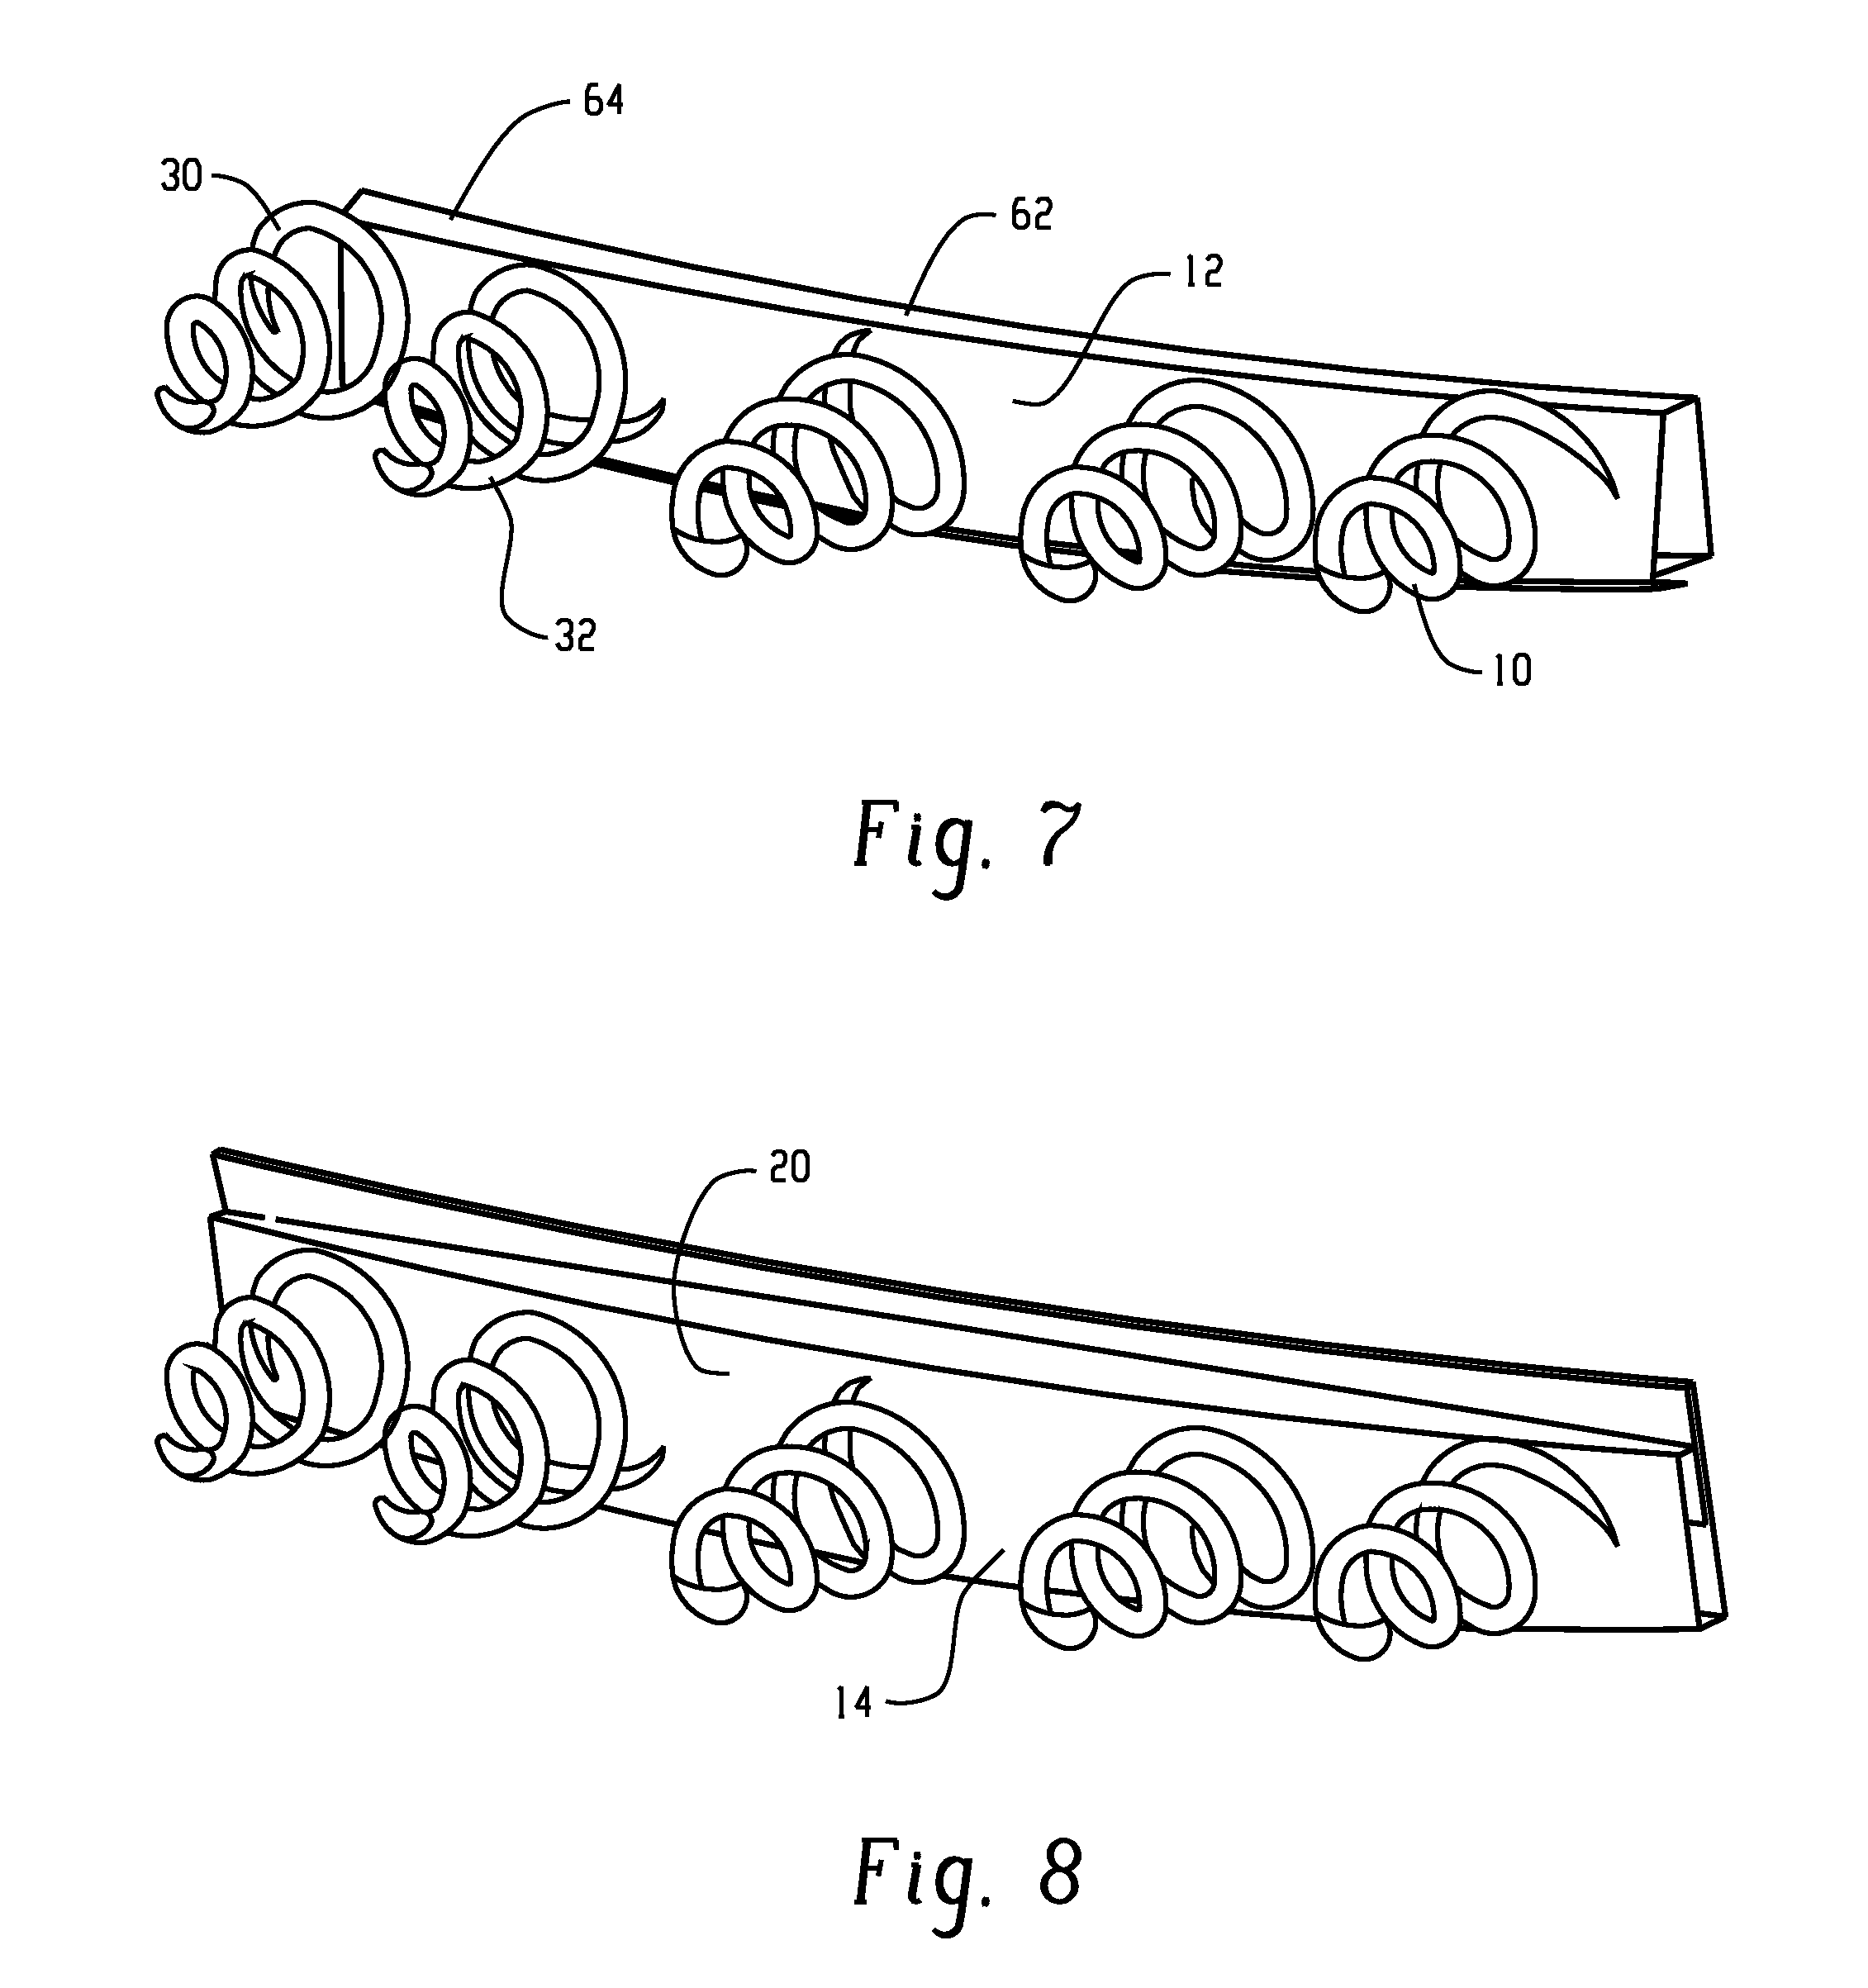 Plastically deformable coil energy absorber systems